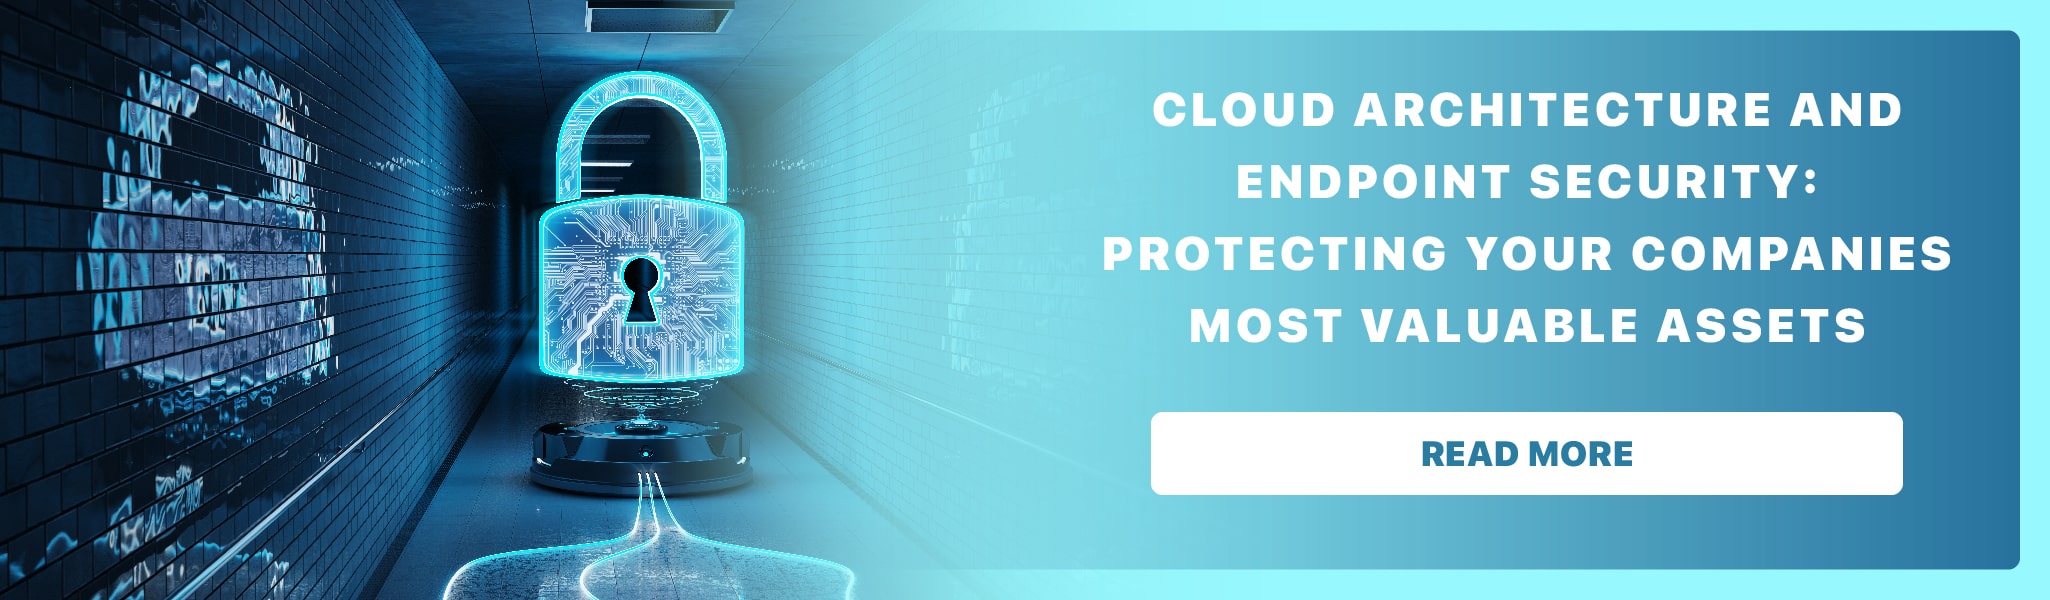 Cloud Architecture and Endpoint Security: Protecting Your Company's Most Valuable Assets